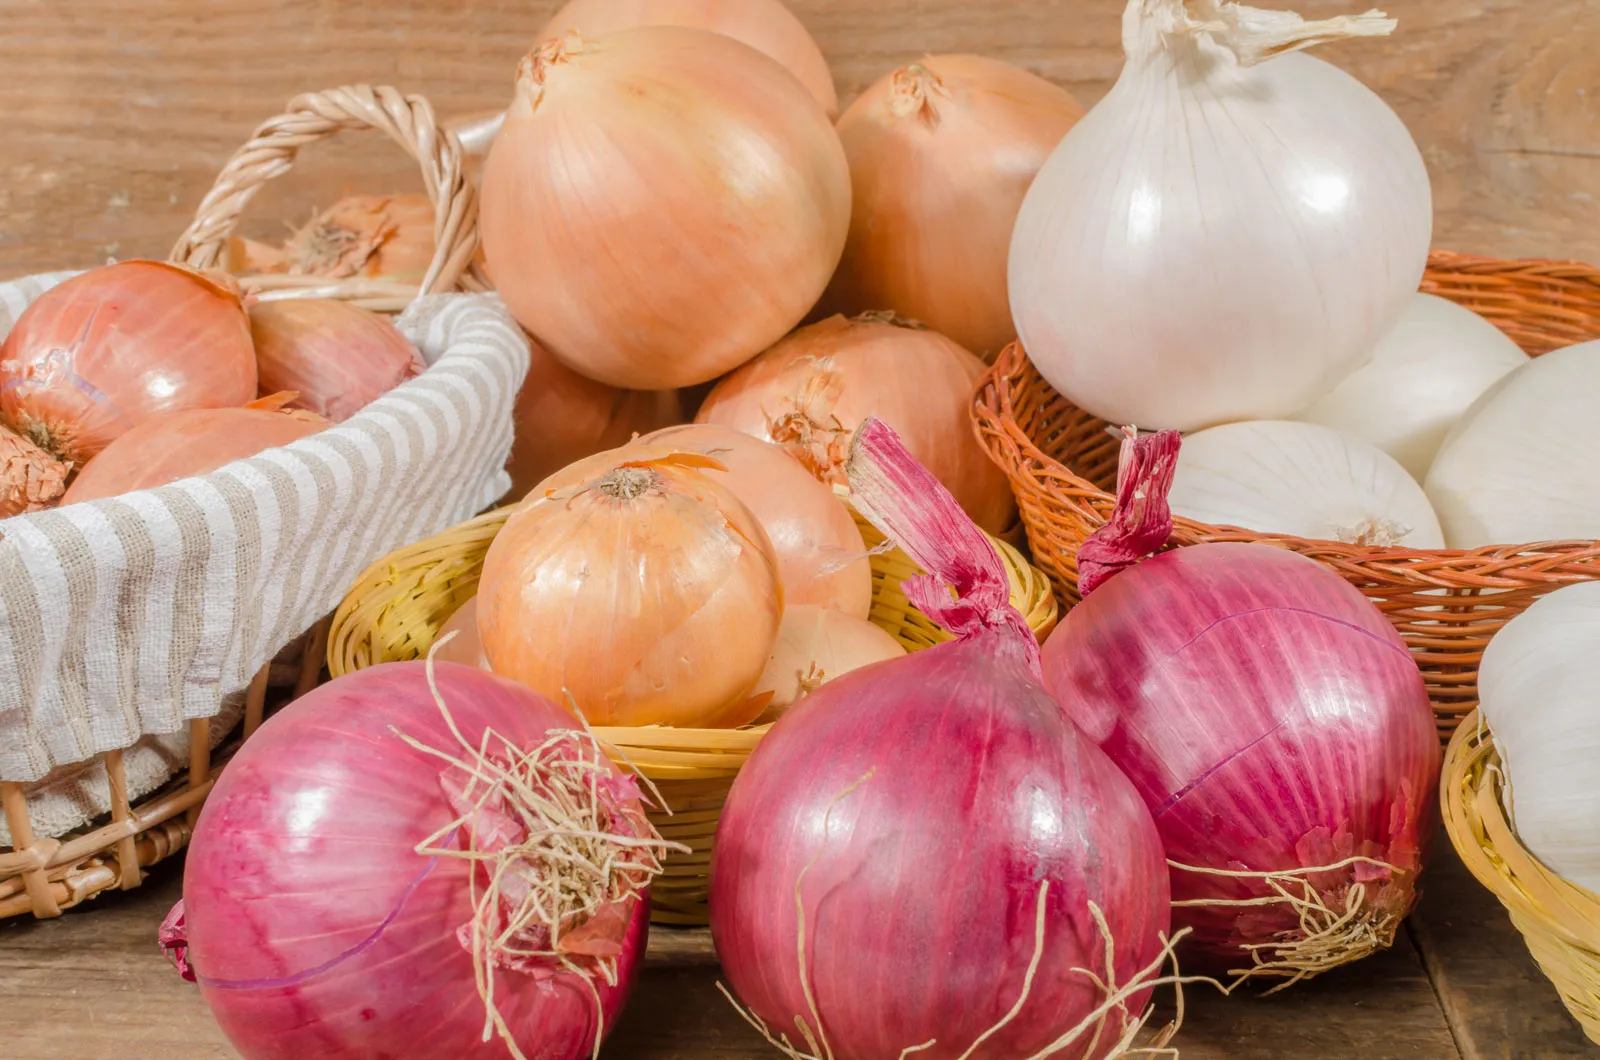 What Role Does Onion Play in the Treatment of Health Problems?